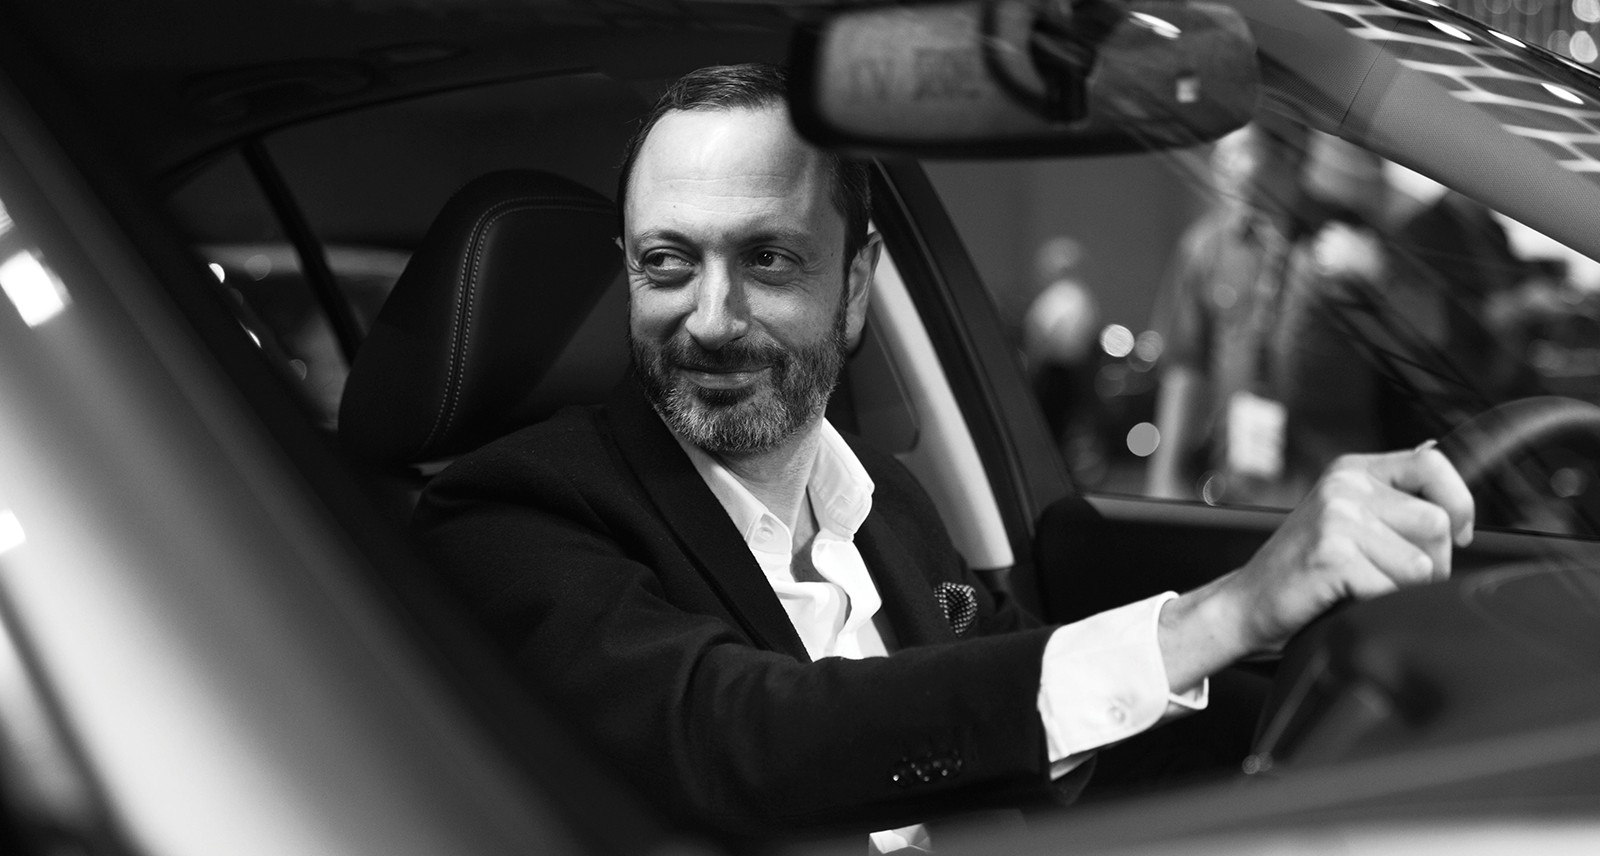 Meet Karim Habib, the Canadian Who's About to Completely Reinvent Infiniti